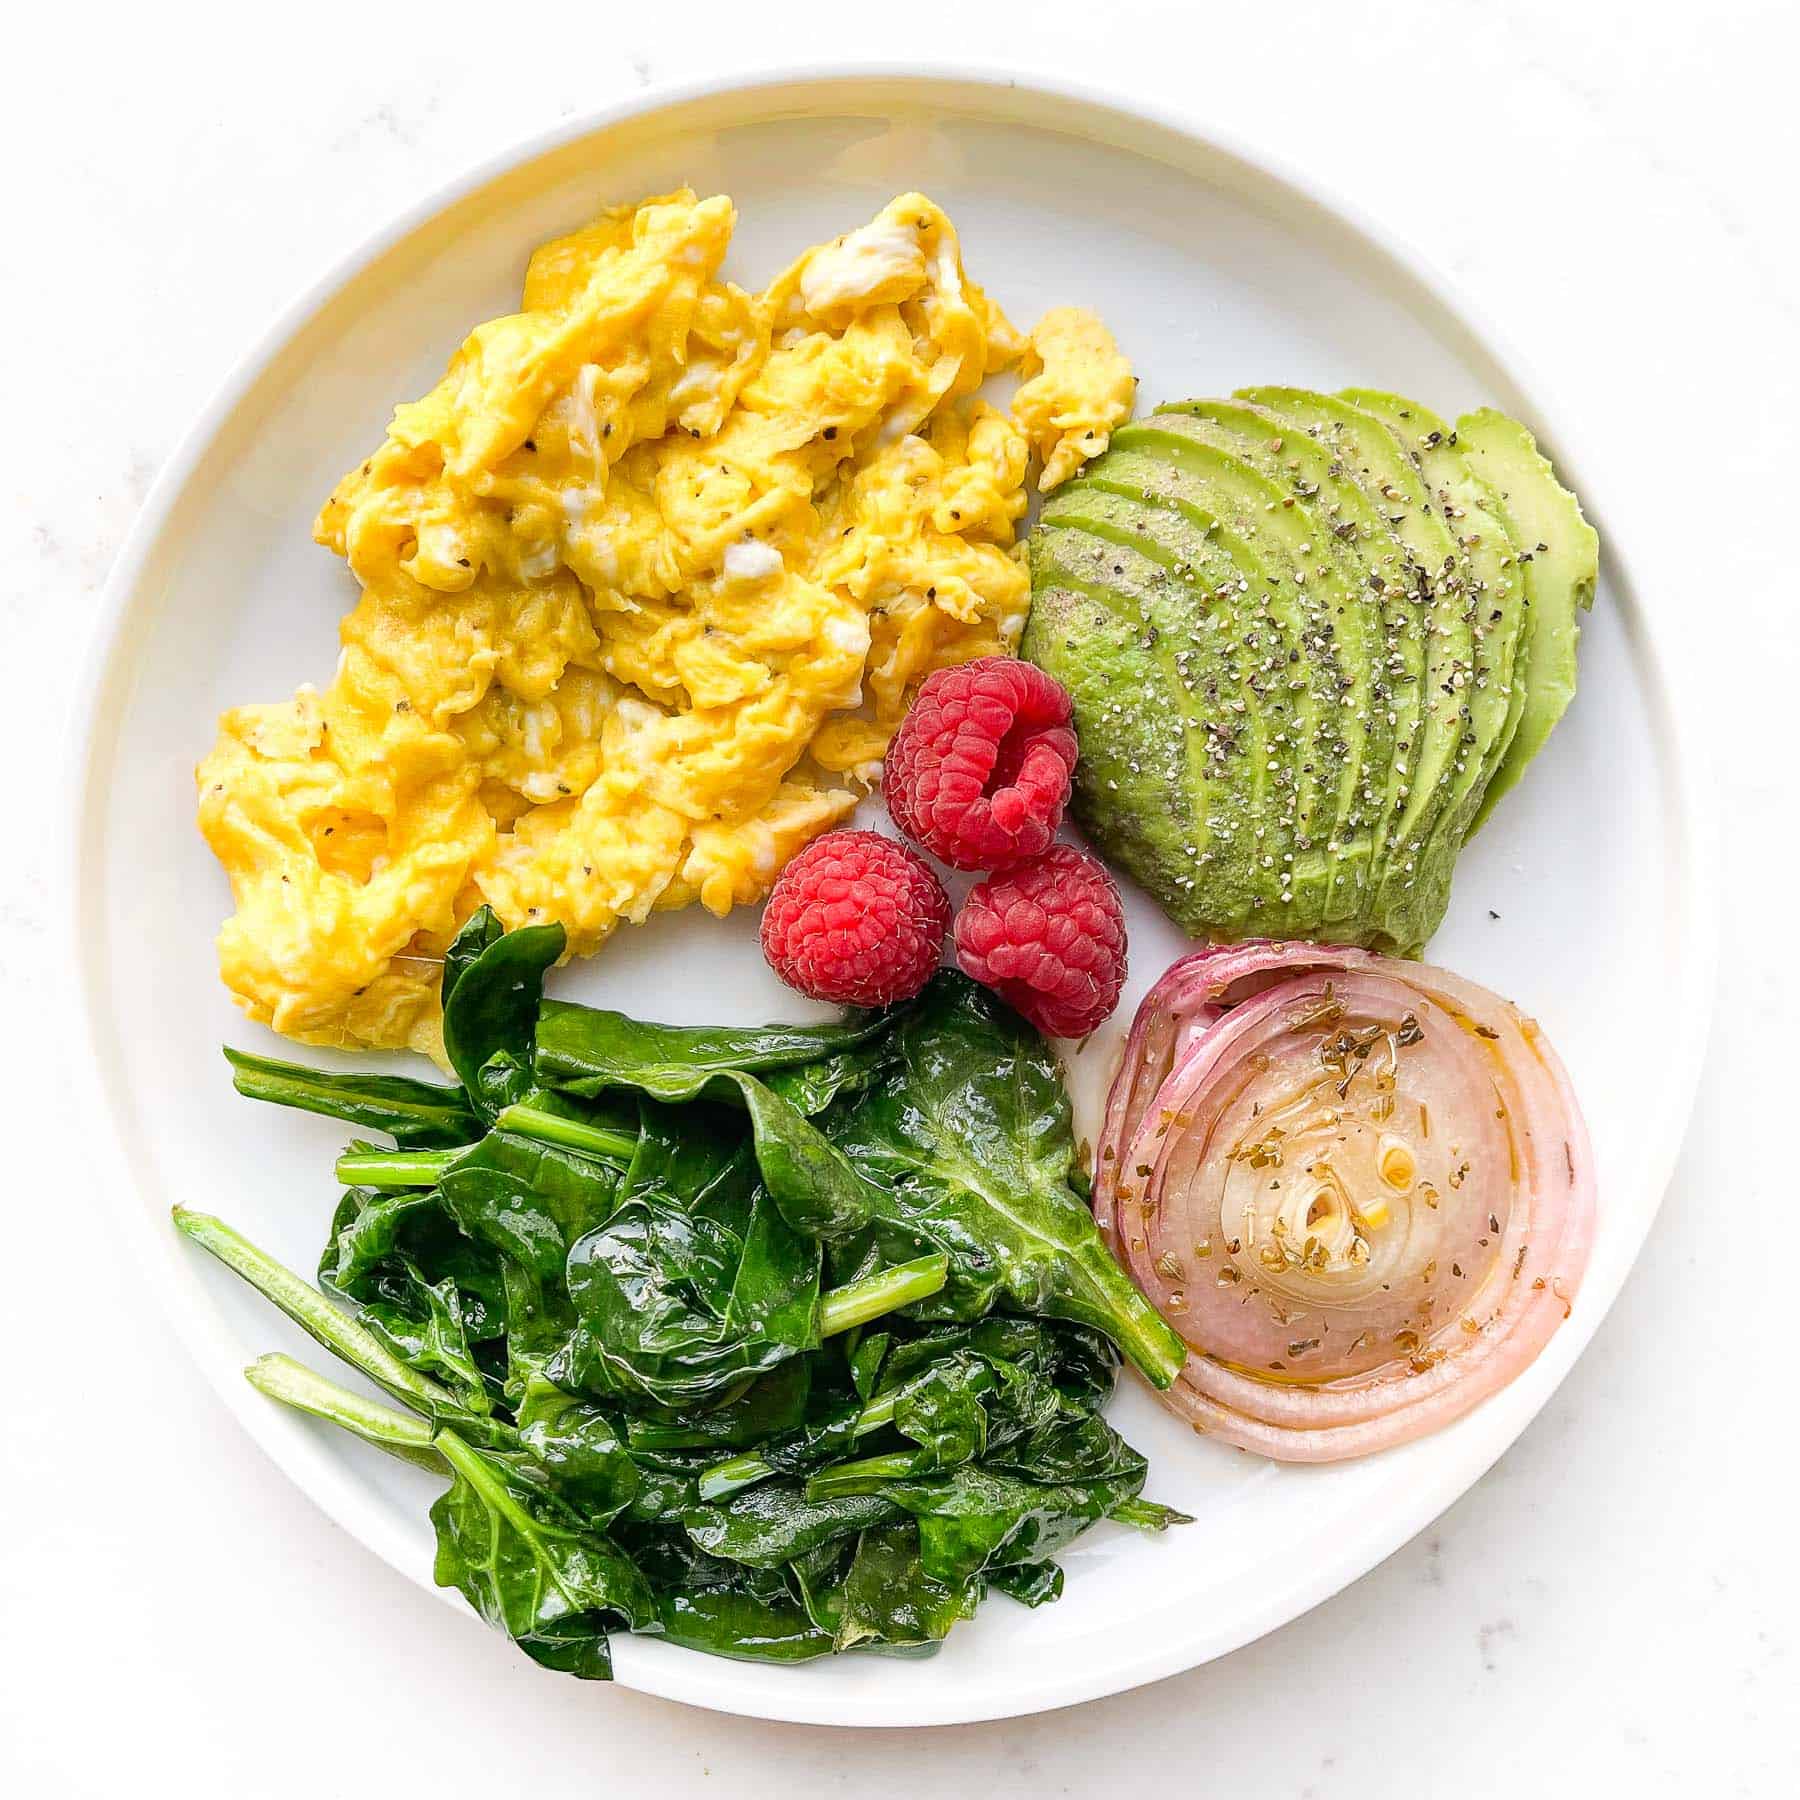 https://www.tasteslovely.com/wp-content/uploads/2021/03/Scrambled-Eggs-with-Spinach-Marinated-Onions-01-2.jpg